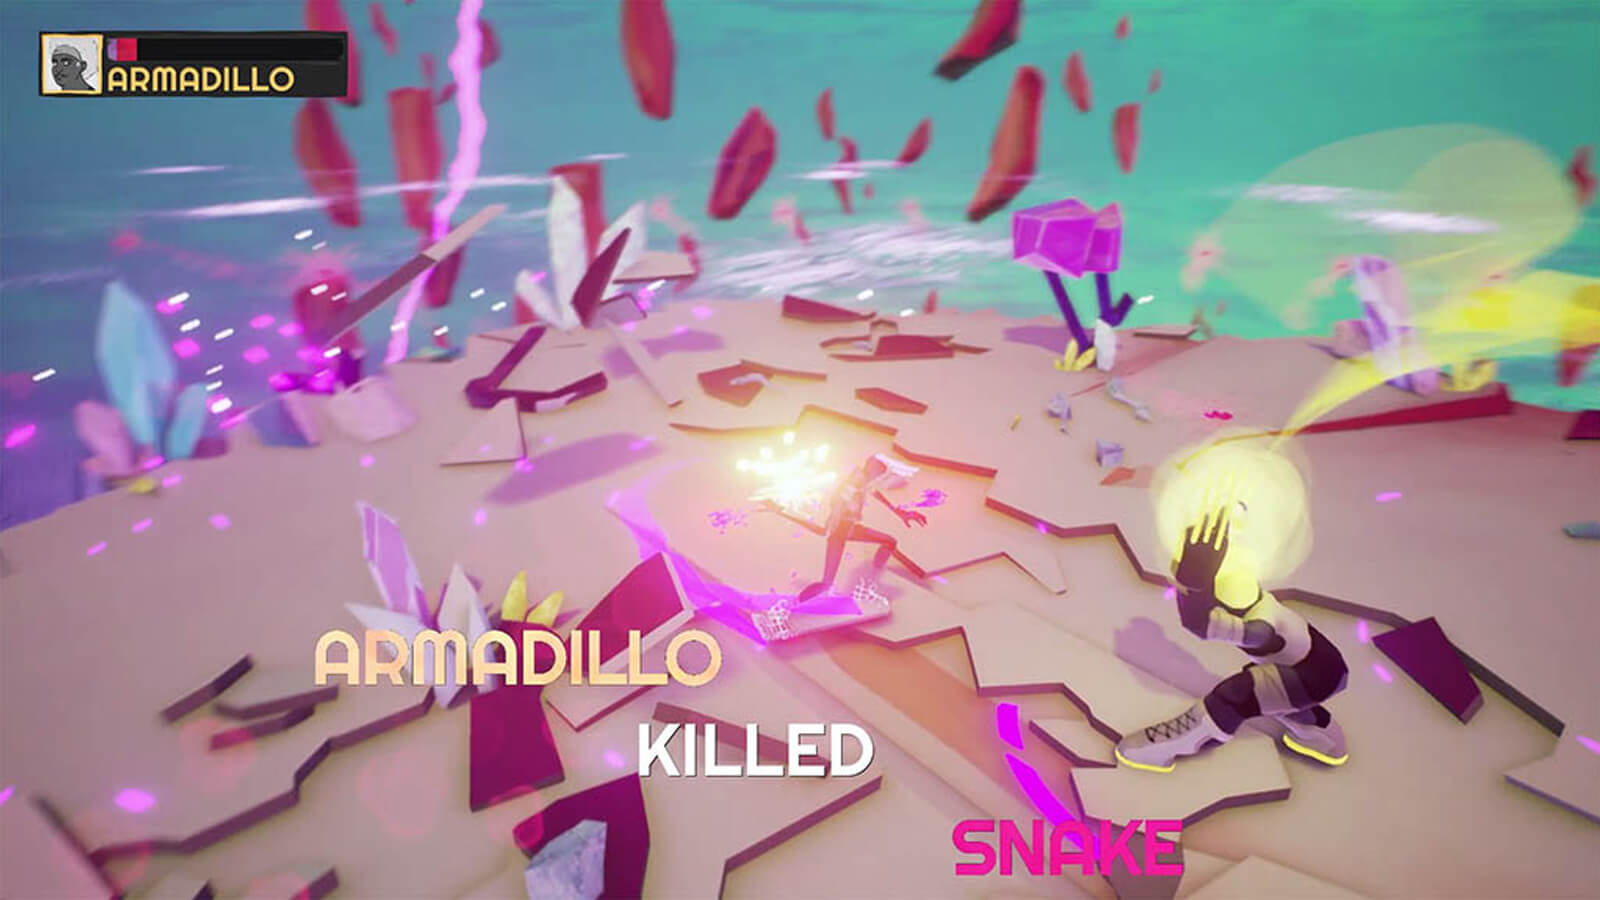 Two players battle each other, the words "Armadillo killed snake" in the foreground.